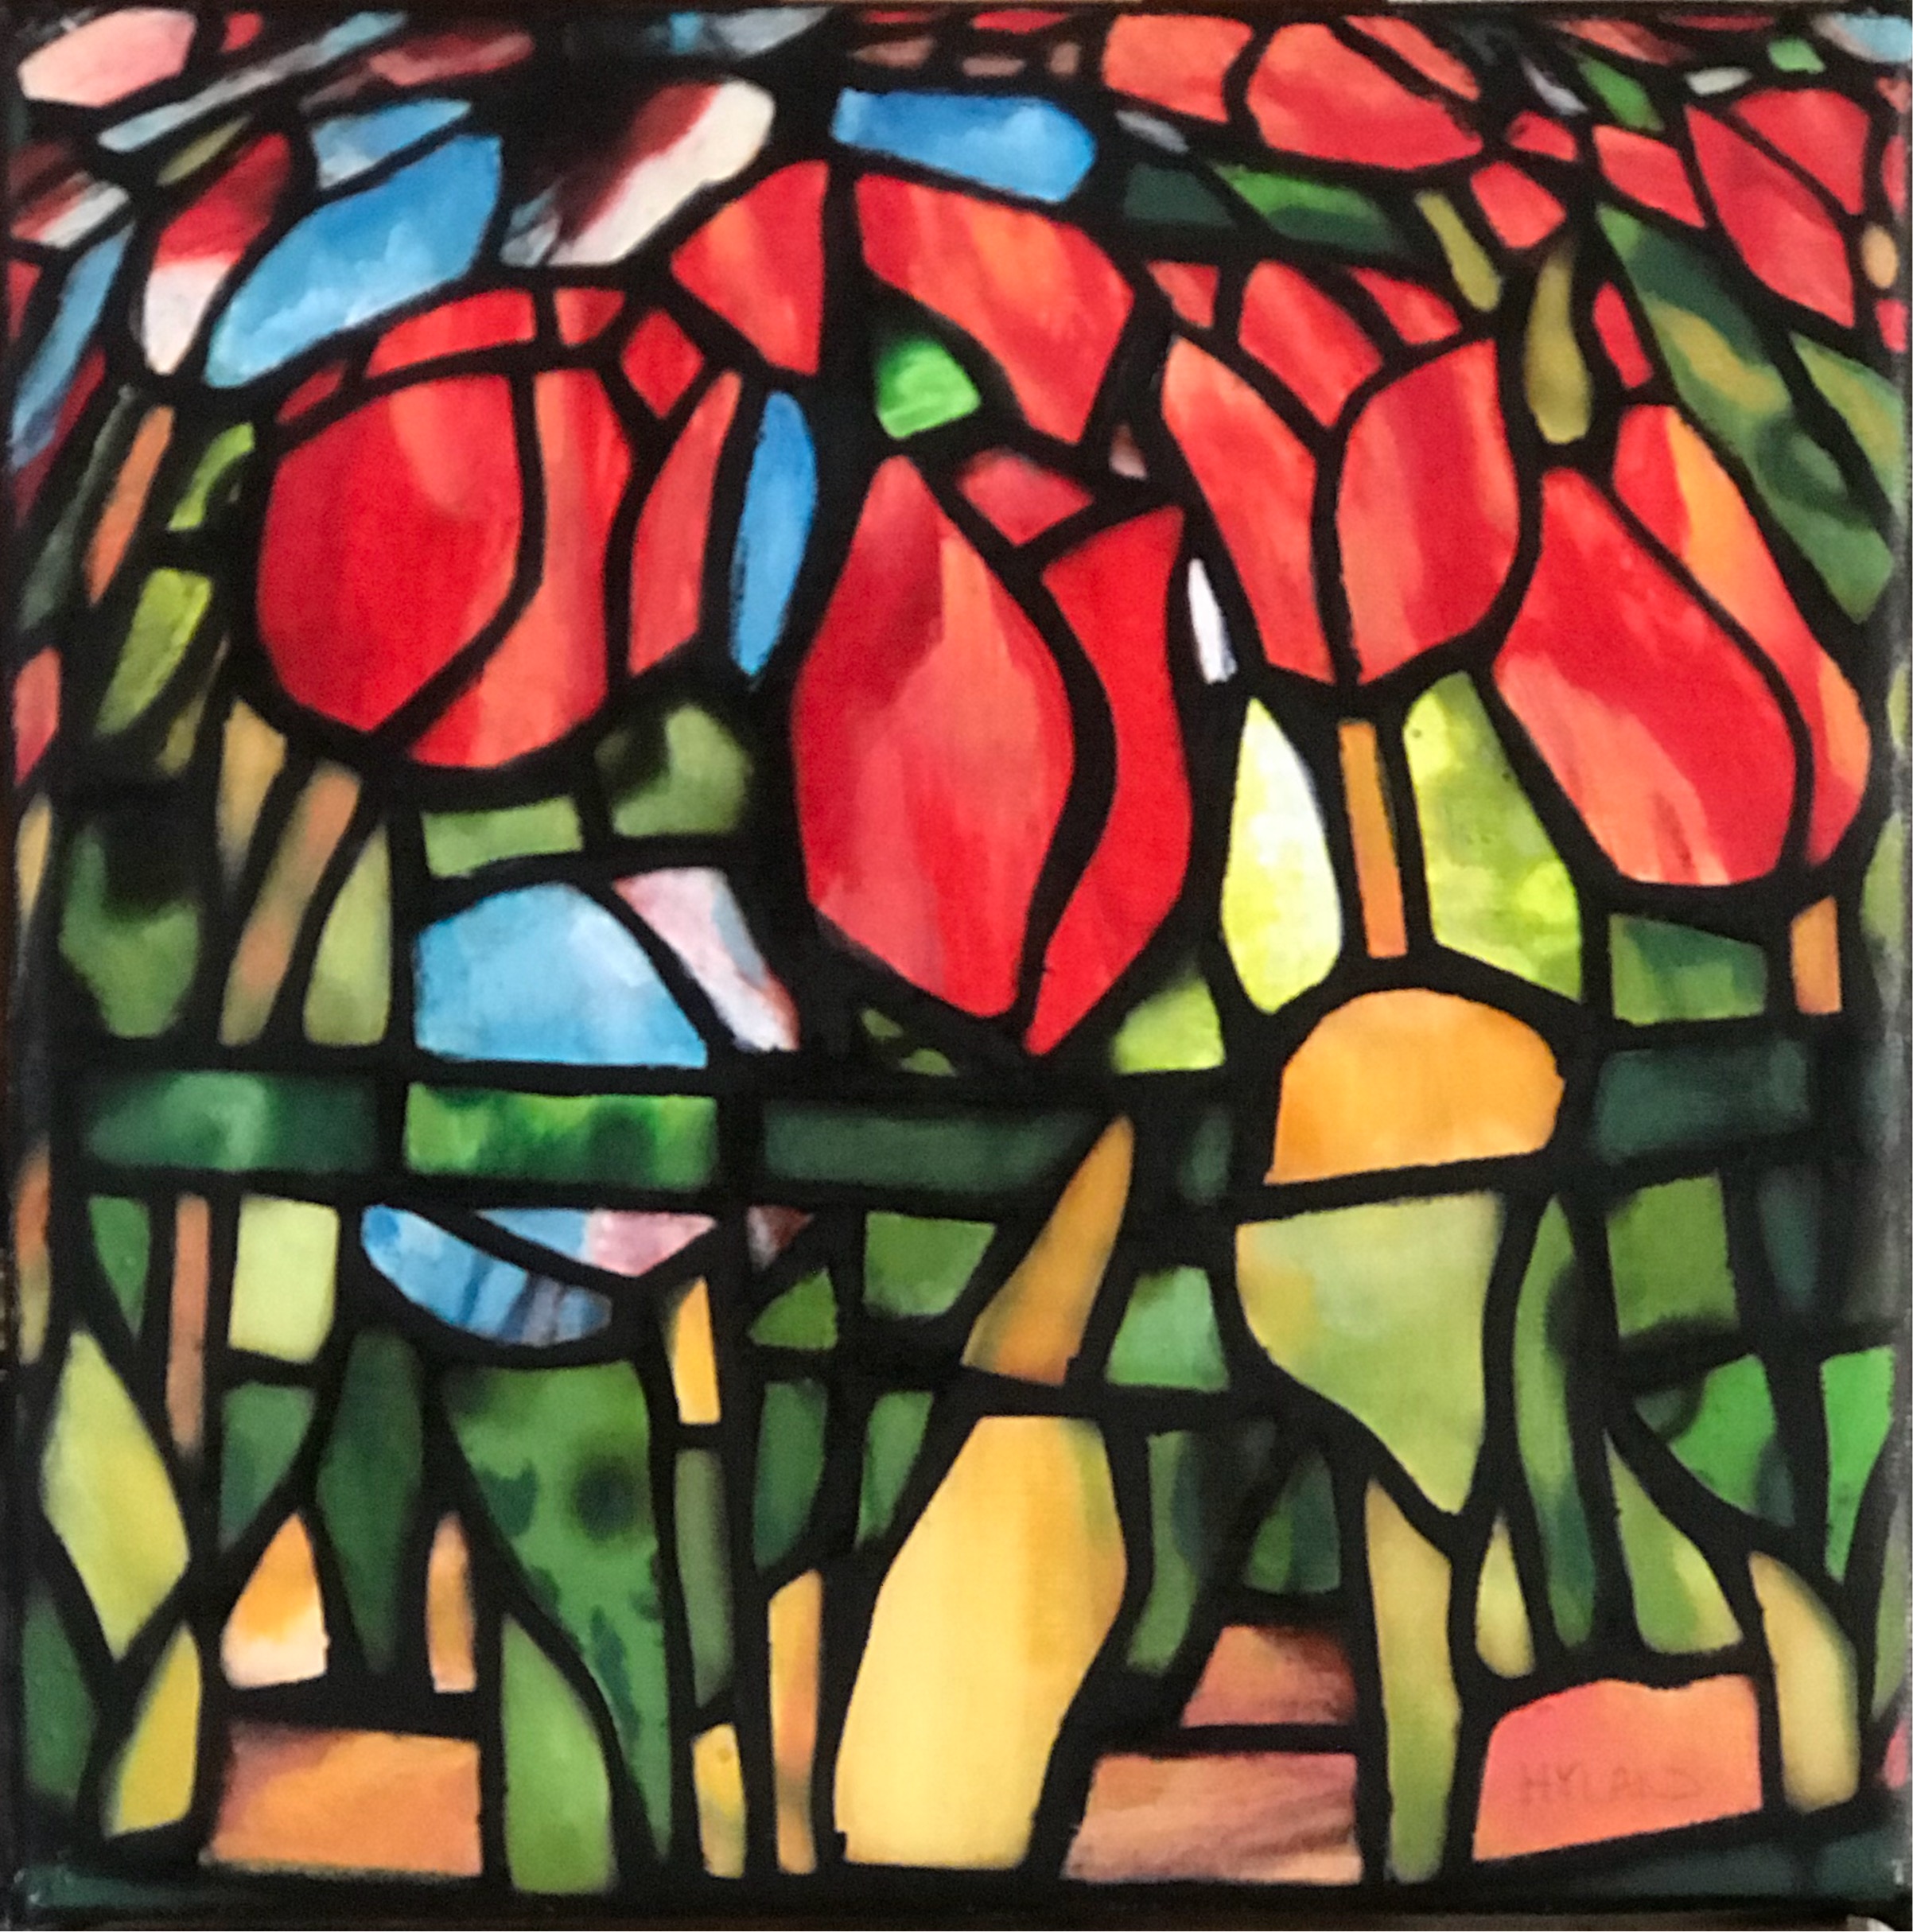  John Hyland │ This Same Flower That Smiles Today │ Oil on Canvas │ 8 inches square or 20 ¼ cm square 